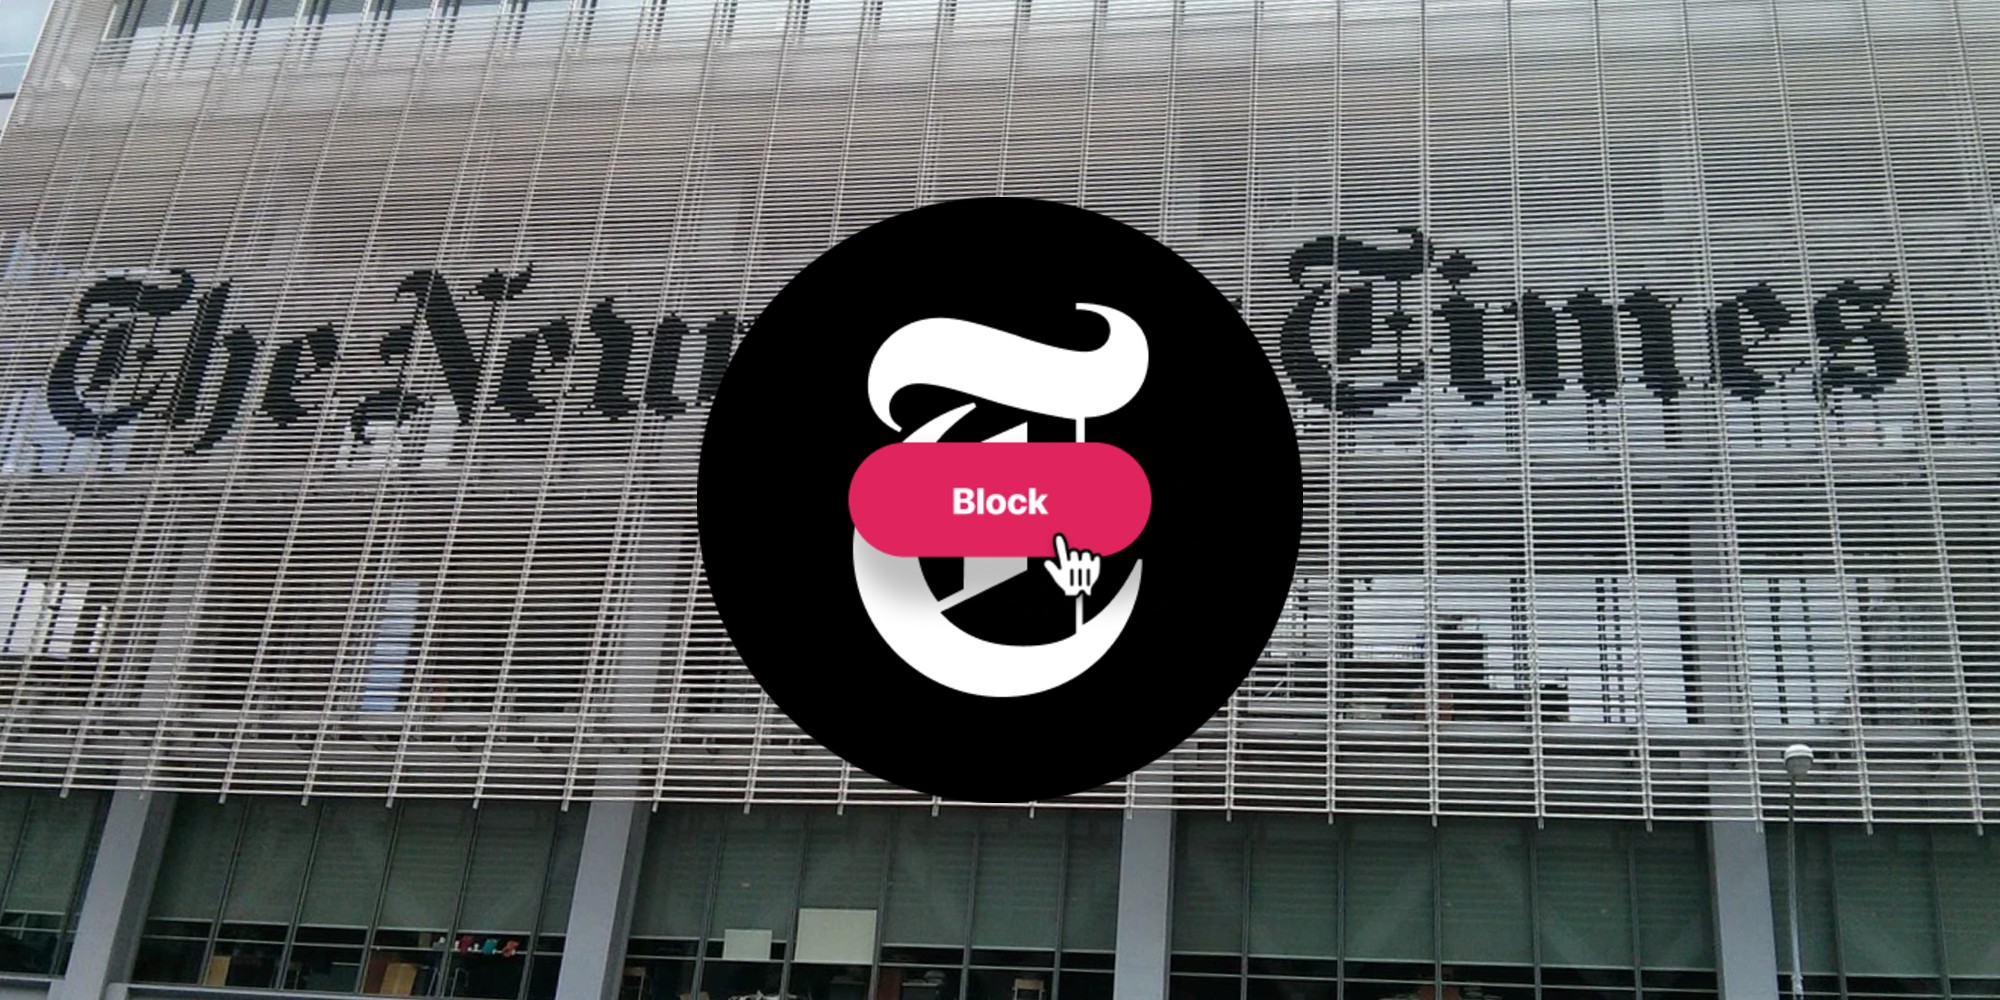 nytimes twitter